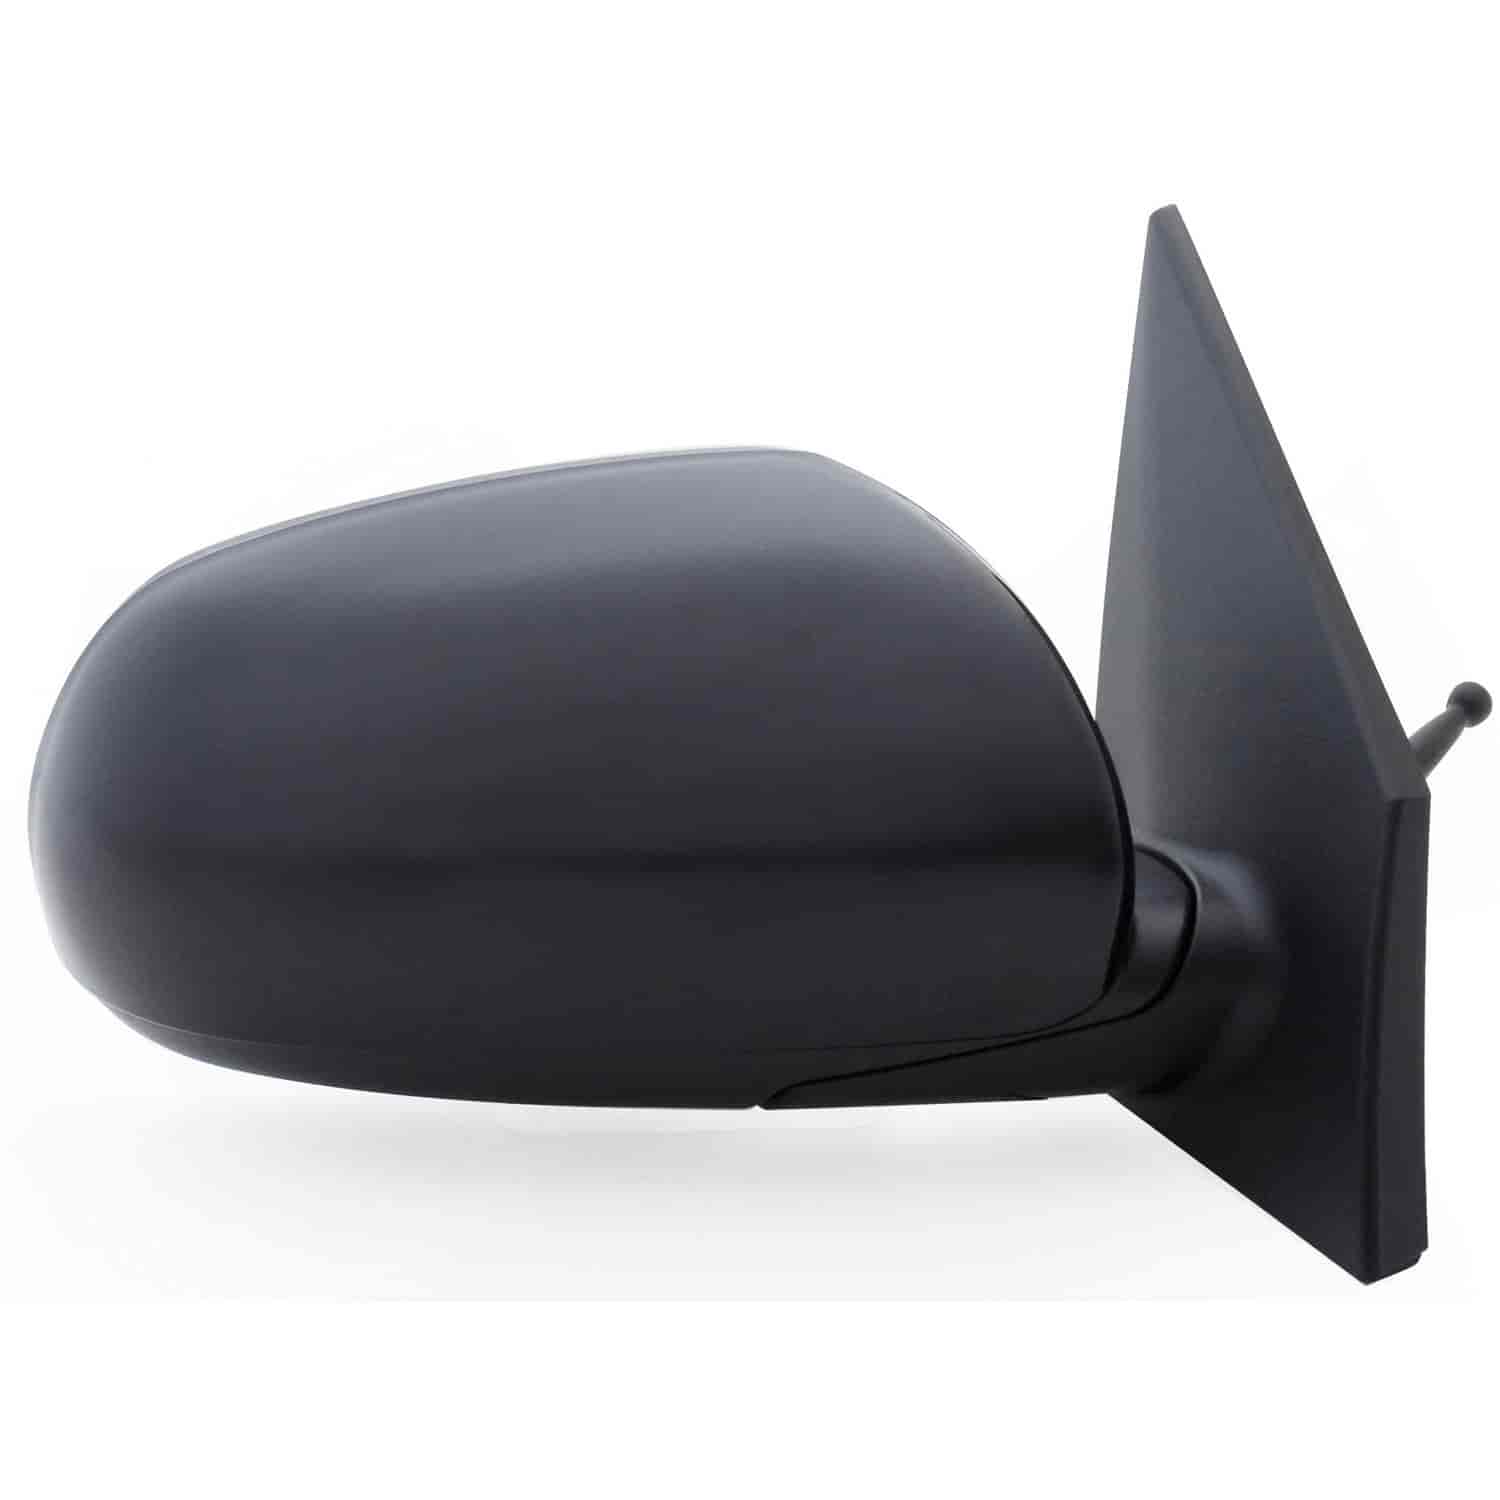 OEM Style Replacement mirror for 10-11 Kia Rio 5/ Rio Sedan passenger side mirror tested to fit and